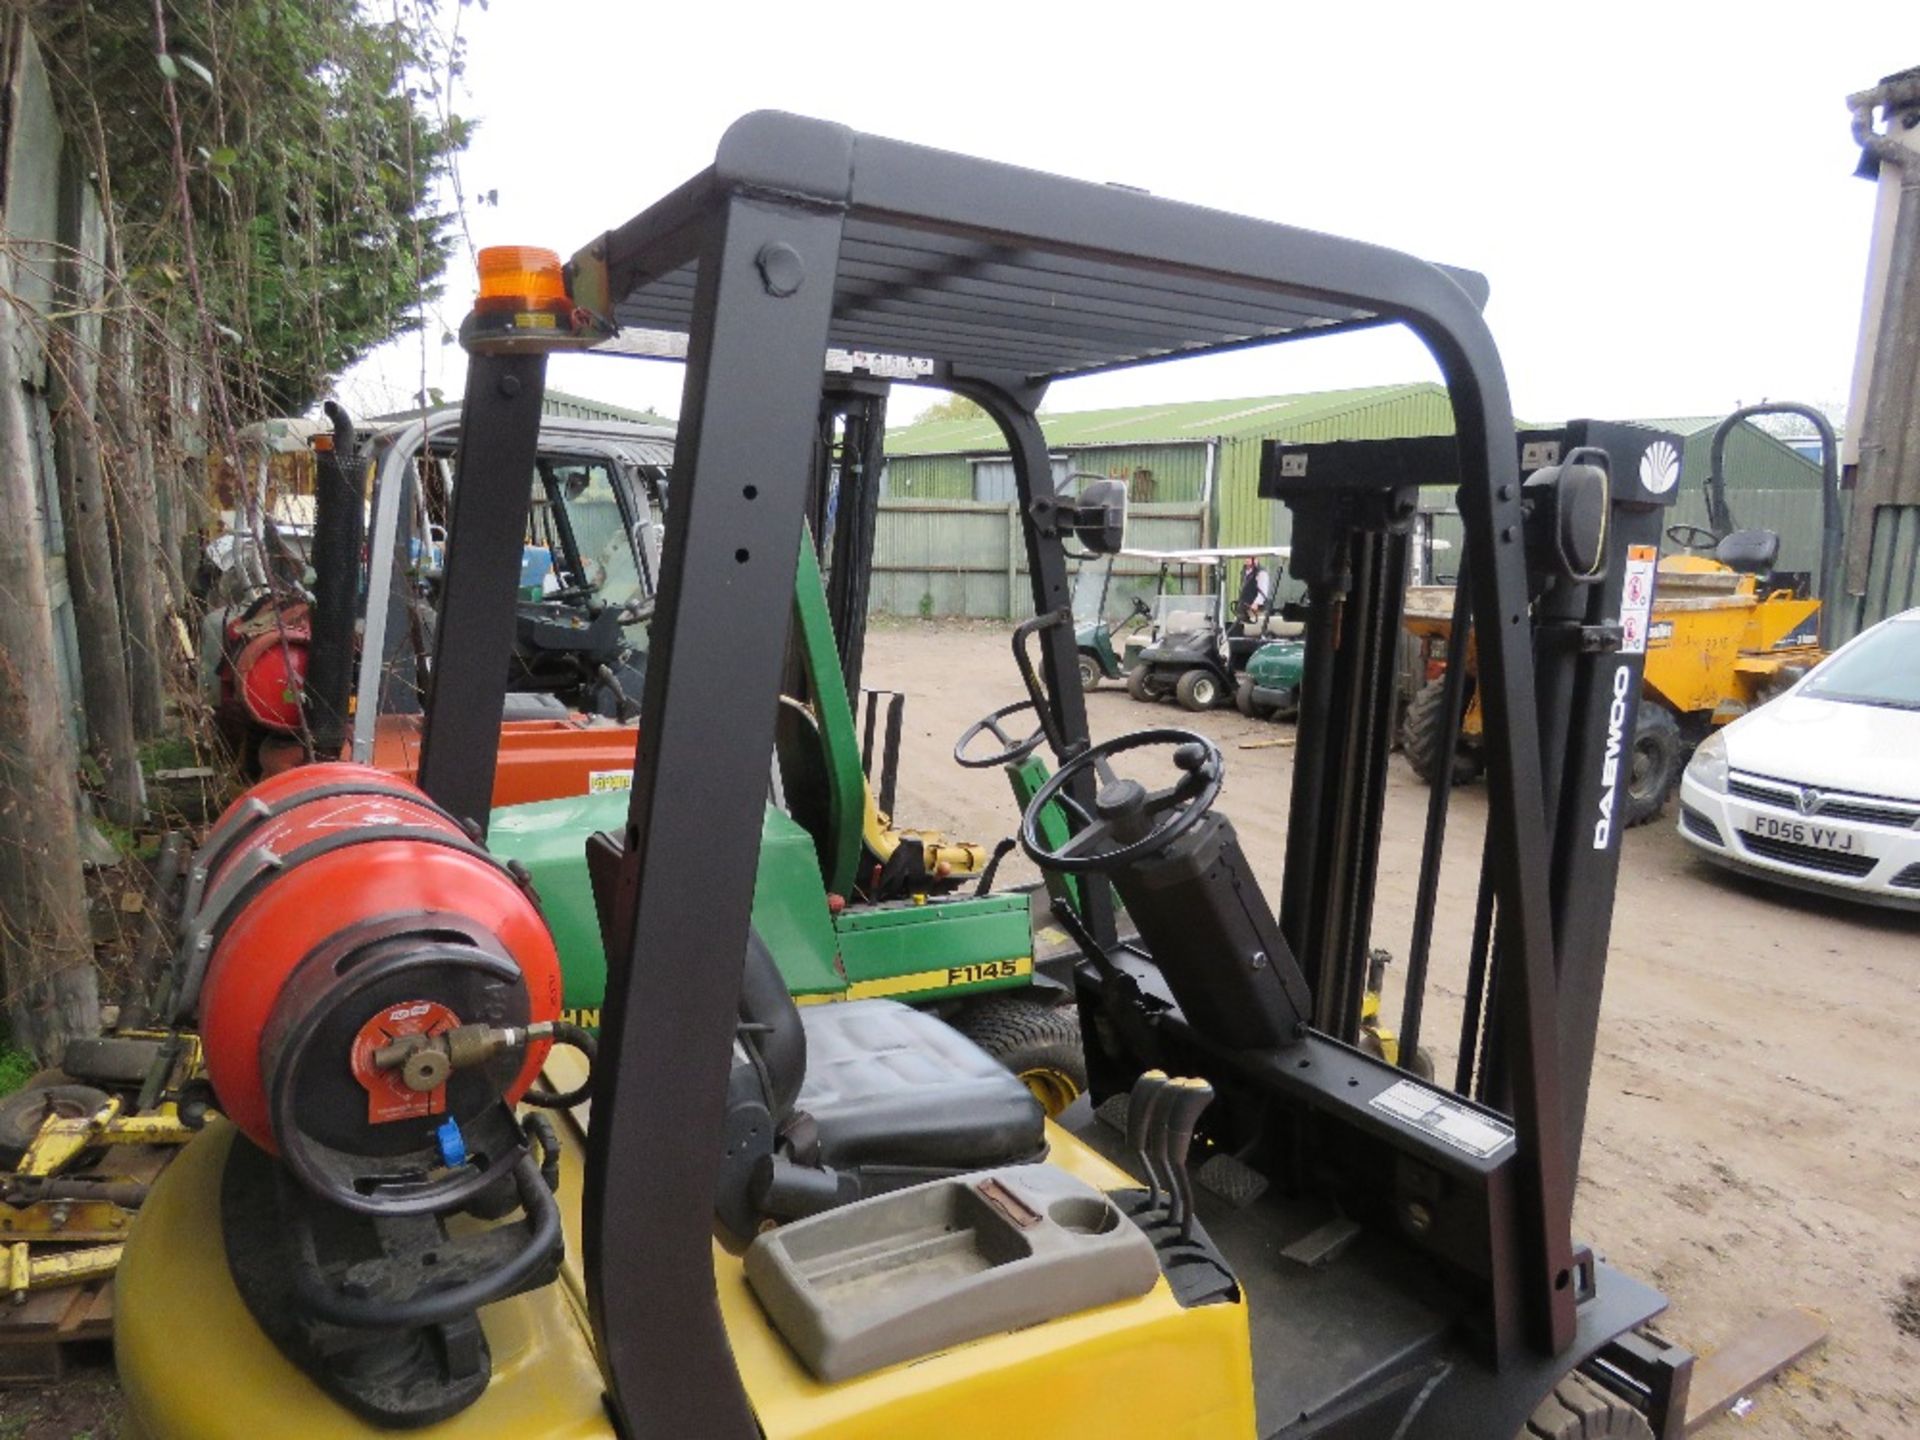 DAEWOO G18S-2 GAS POWERED FORKLIFT TRUCK WITH SIDE SHIFT. 1.8TONNE LIFT CAPACITY. 8136 REC HOURS. YE - Image 8 of 12